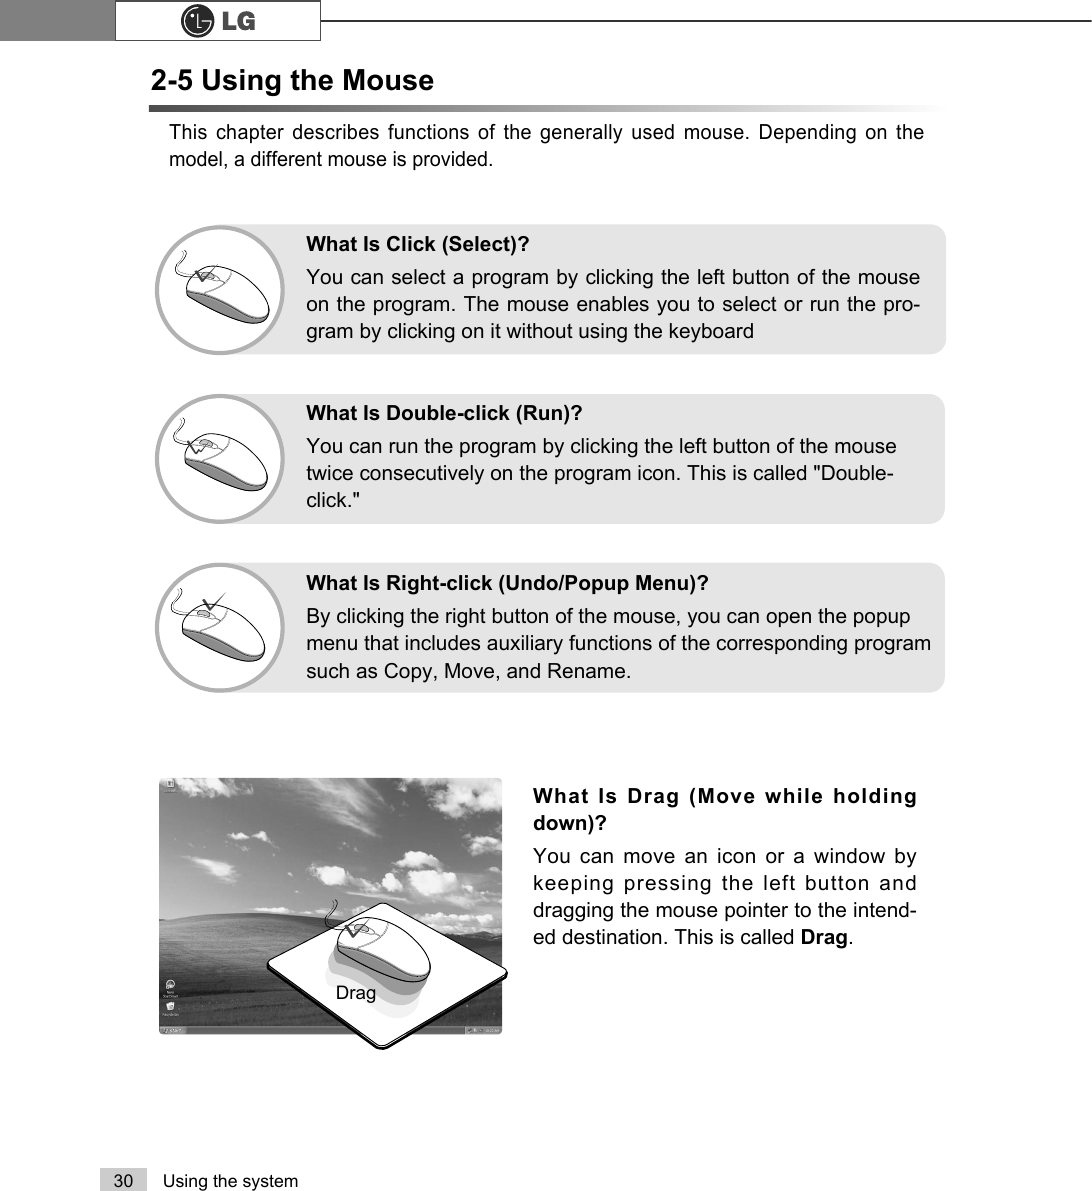 30 Using the systemThis chapter describes functions of the generally used mouse. Depending on themodel, a different mouse is provided. What Is Drag (Move while holdingdown)? You can move an icon or a window bykeeping pressing the left button anddragging the mouse pointer to the intend-ed destination. This is called Drag. DragWhat Is Double-click (Run)?You can run the program by clicking the left button of the mousetwice consecutively on the program icon. This is called &quot;Double-click.&quot; What Is Right-click (Undo/Popup Menu)?By clicking the right button of the mouse, you can open the popupmenu that includes auxiliary functions of the corresponding programsuch as Copy, Move, and Rename.What Is Click (Select)?You can select a program by clicking the left button of the mouseon the program. The mouse enables you to select or run the pro-gram by clicking on it without using the keyboard2-5 Using the Mouse